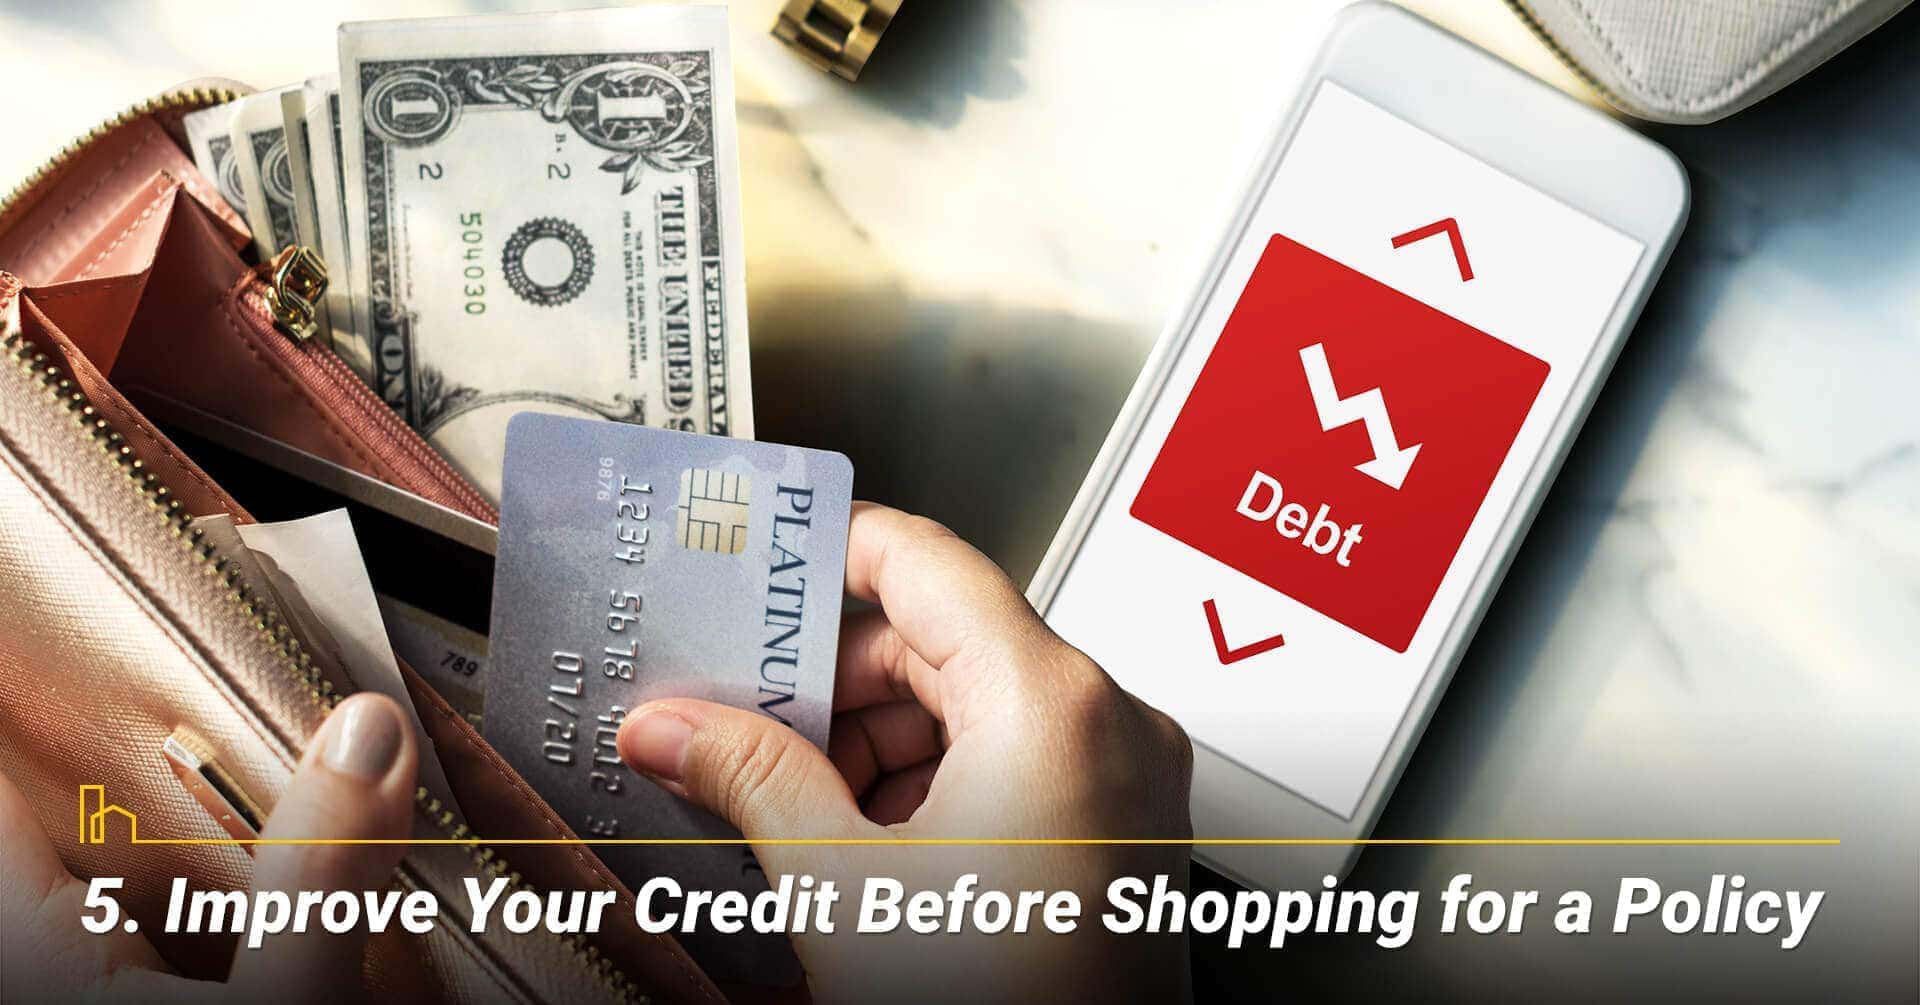 Improve Your Credit Before Shopping for a Policy, improve your credit score for better rate